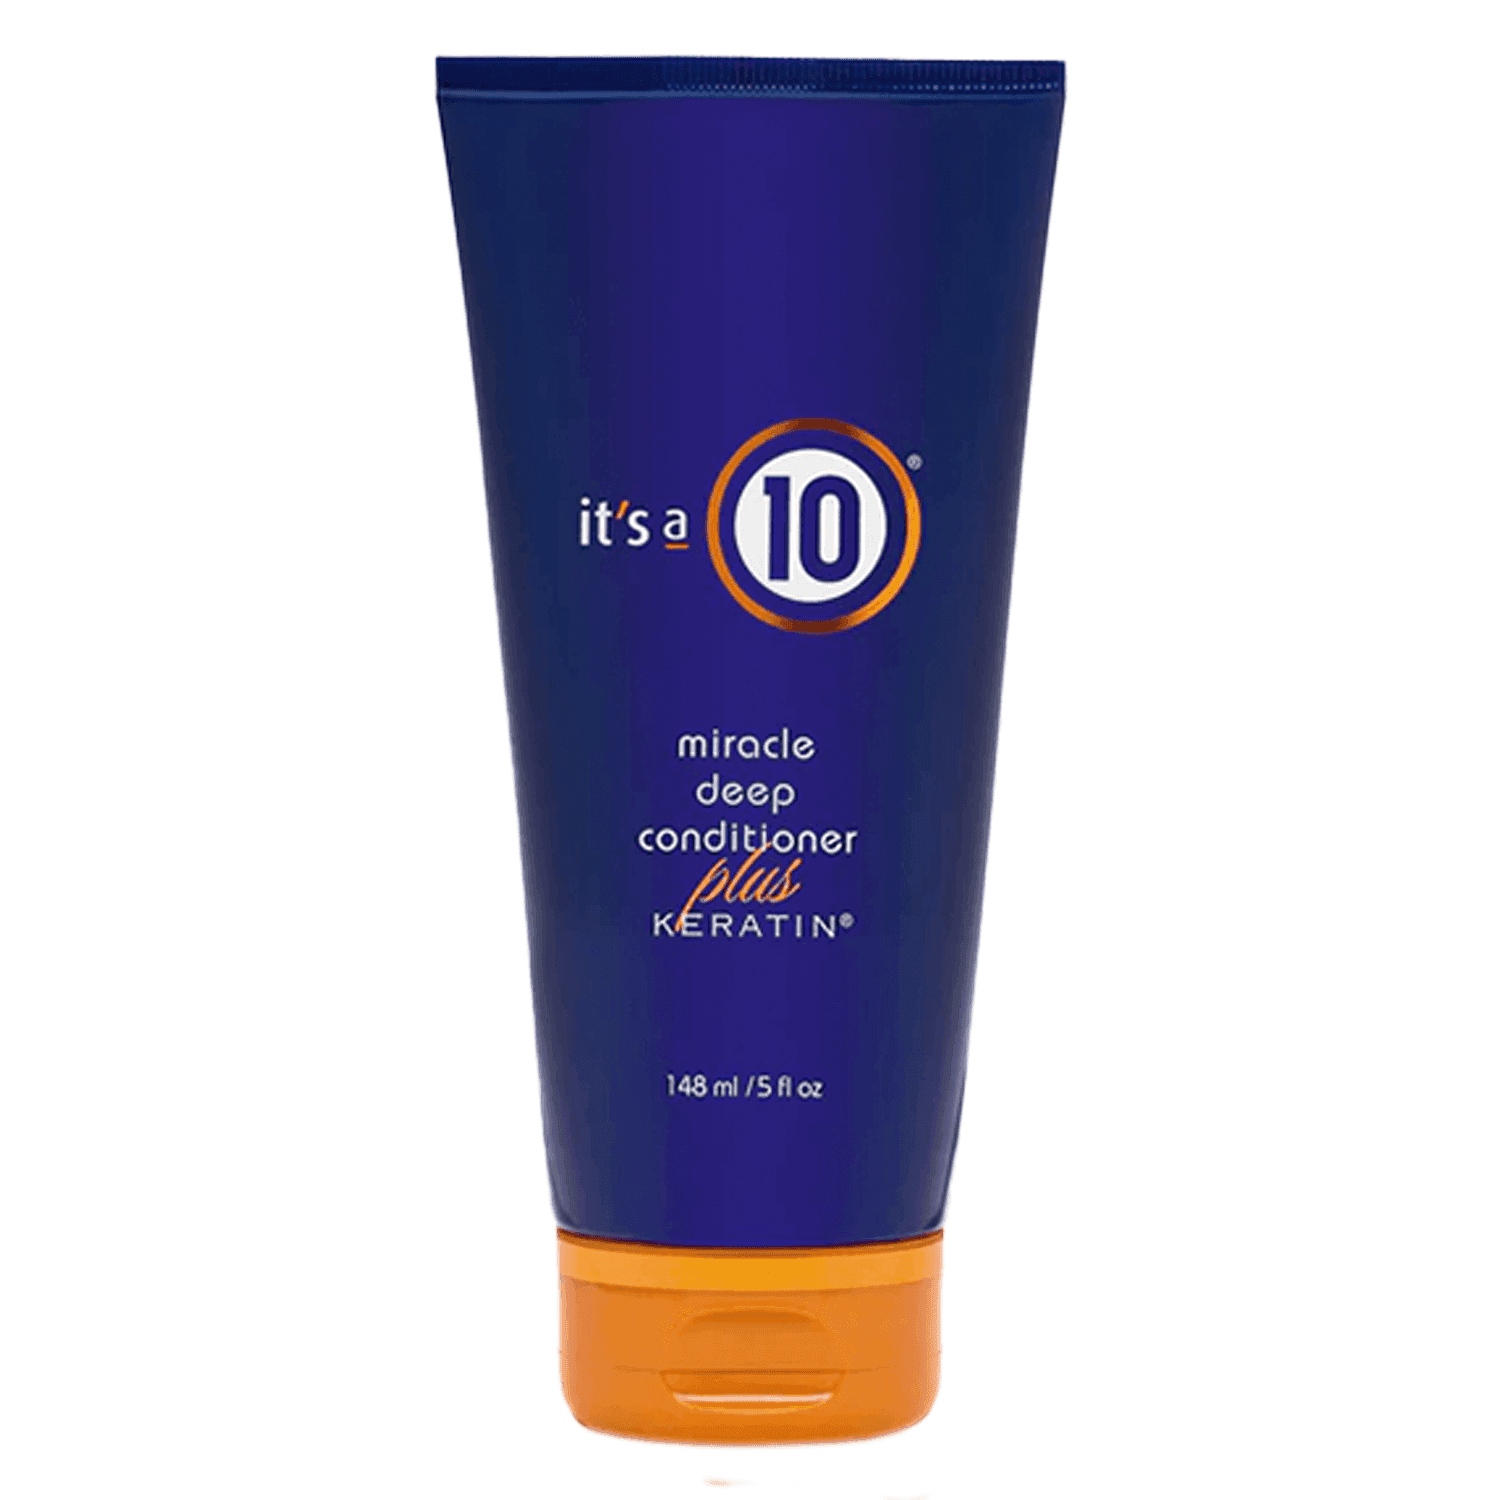 it's a 10 haircare - Miracle Deep Conditioner Plus Keratin